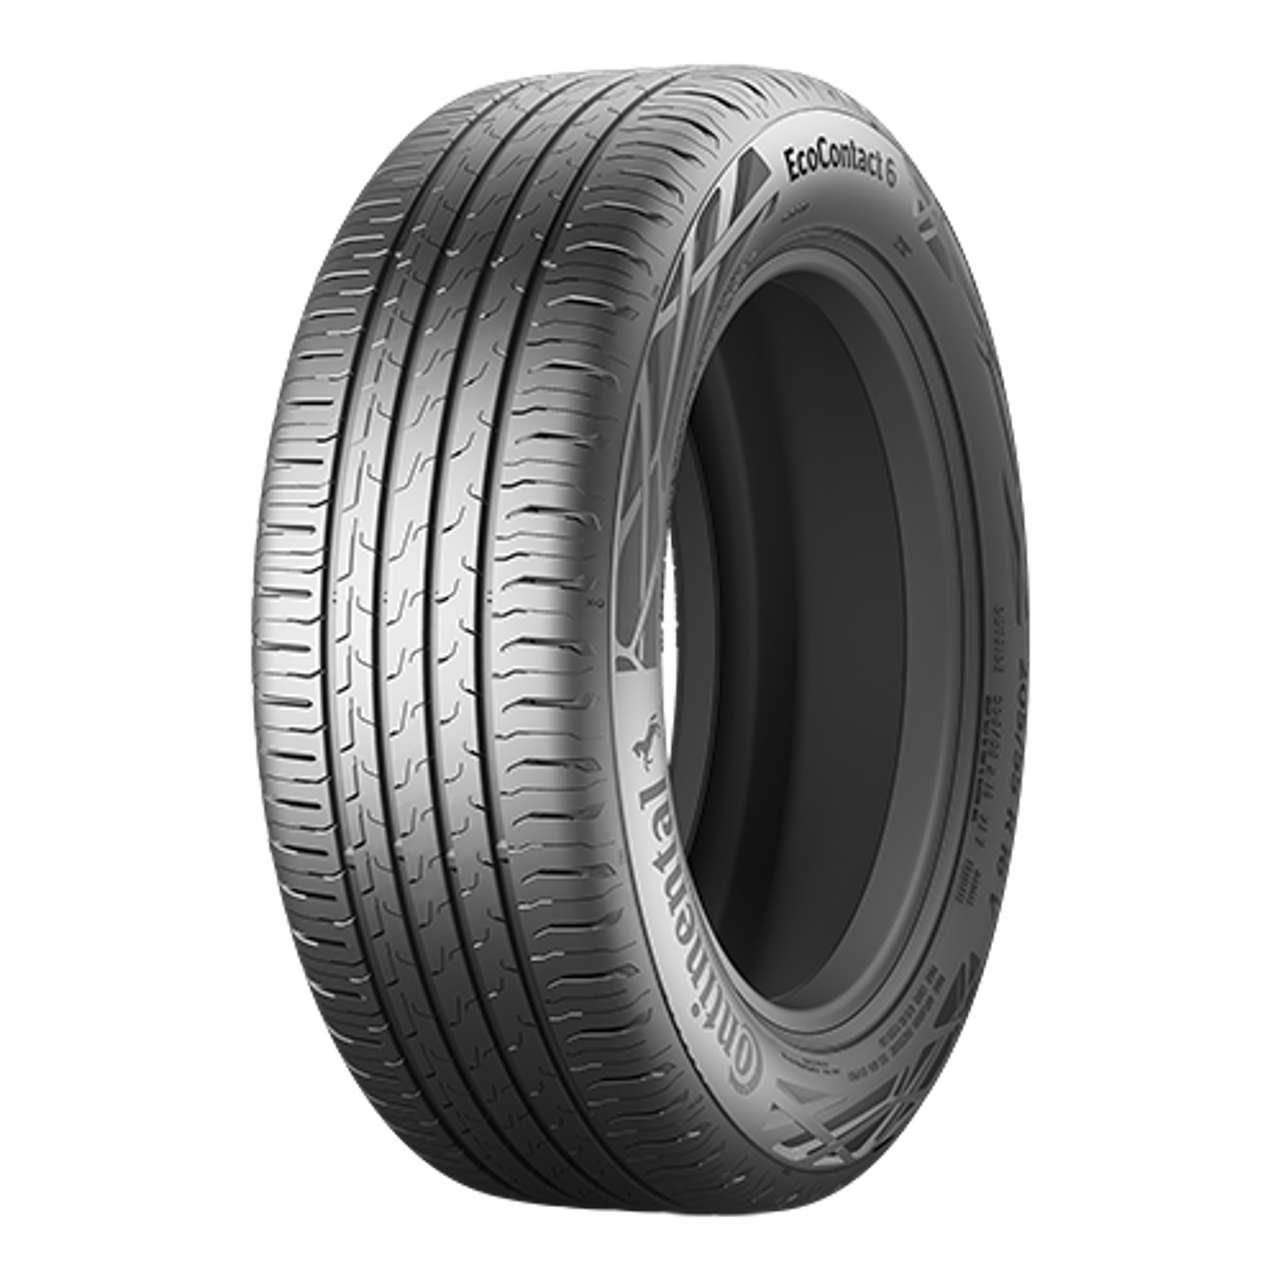 CONTINENTAL ECOCONTACT 6Q (EVc) 235/45R19 99V FR BSW von Continental